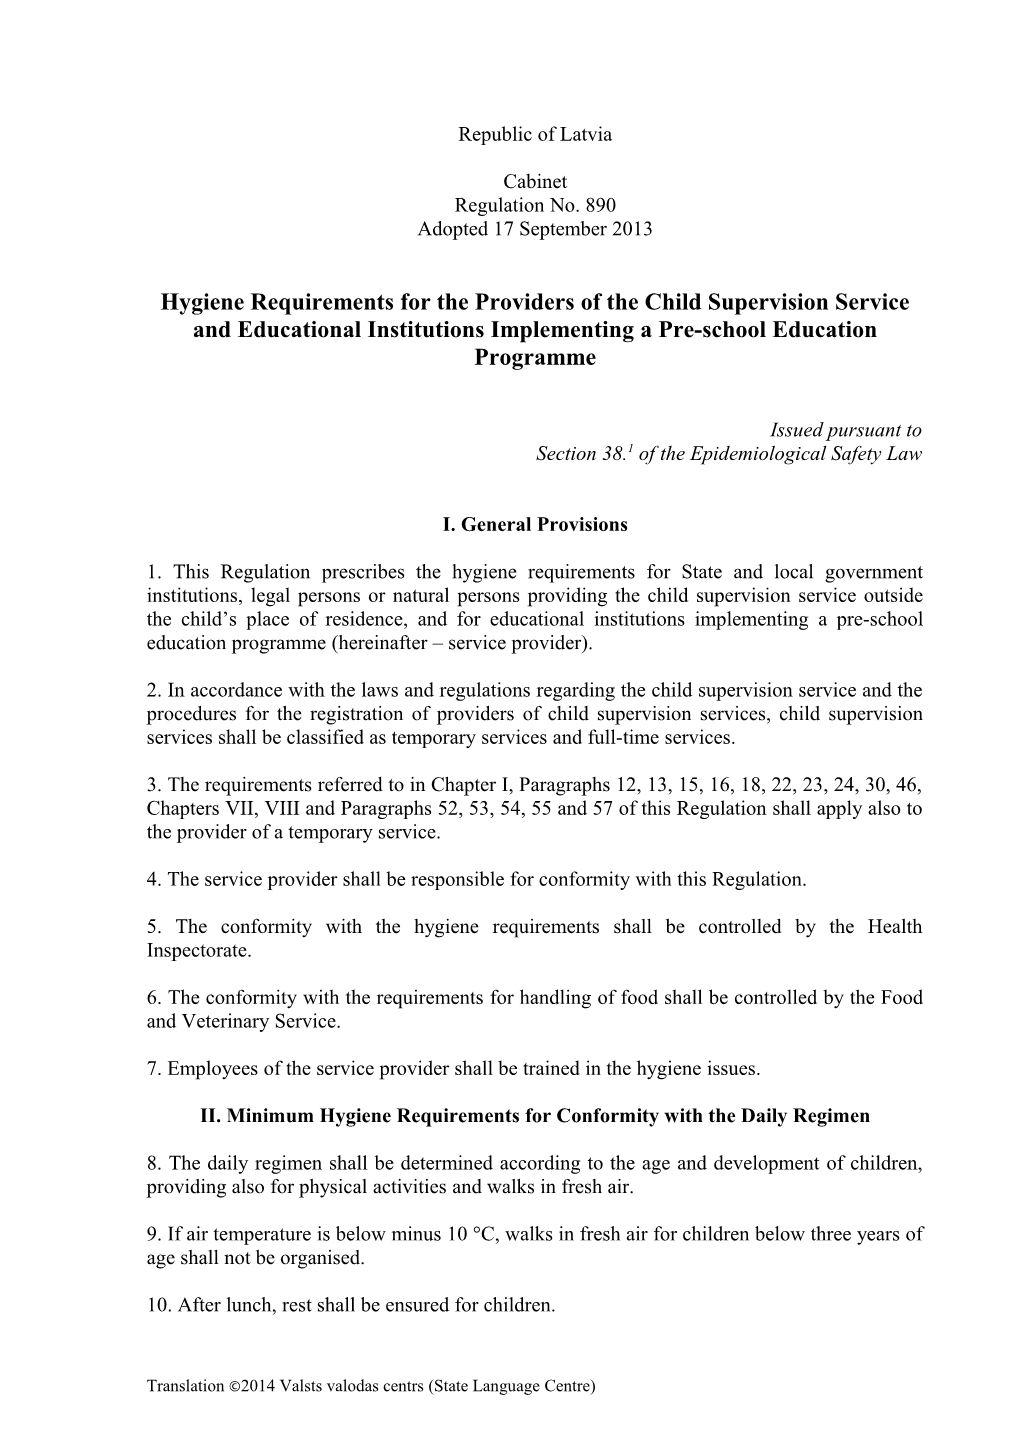 Hygiene Requirements for the Providers of the Child Supervision Service and Educational